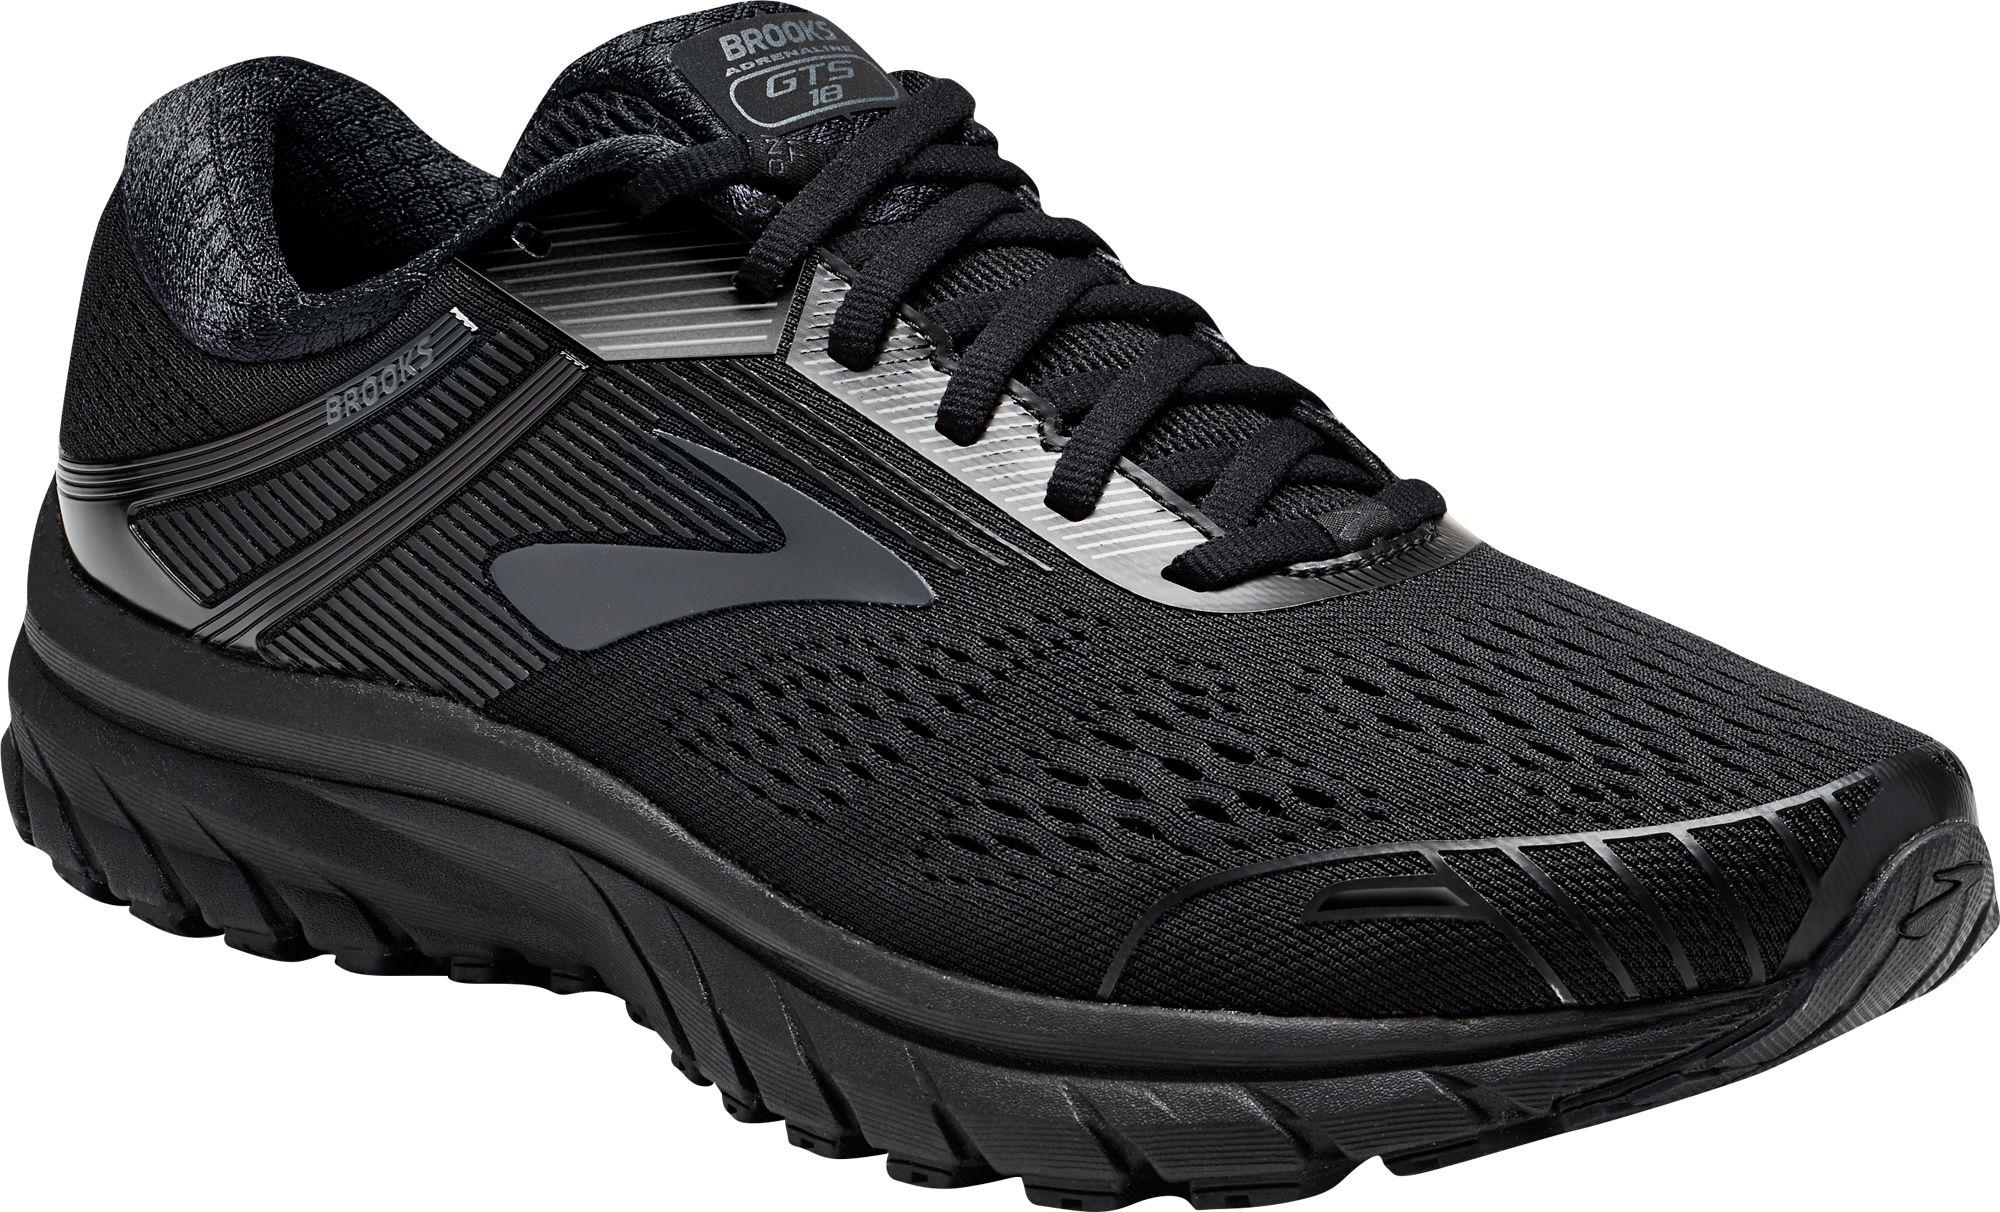 Brooks Adrenaline Gts 18 Running Shoes in Black for Men - Lyst